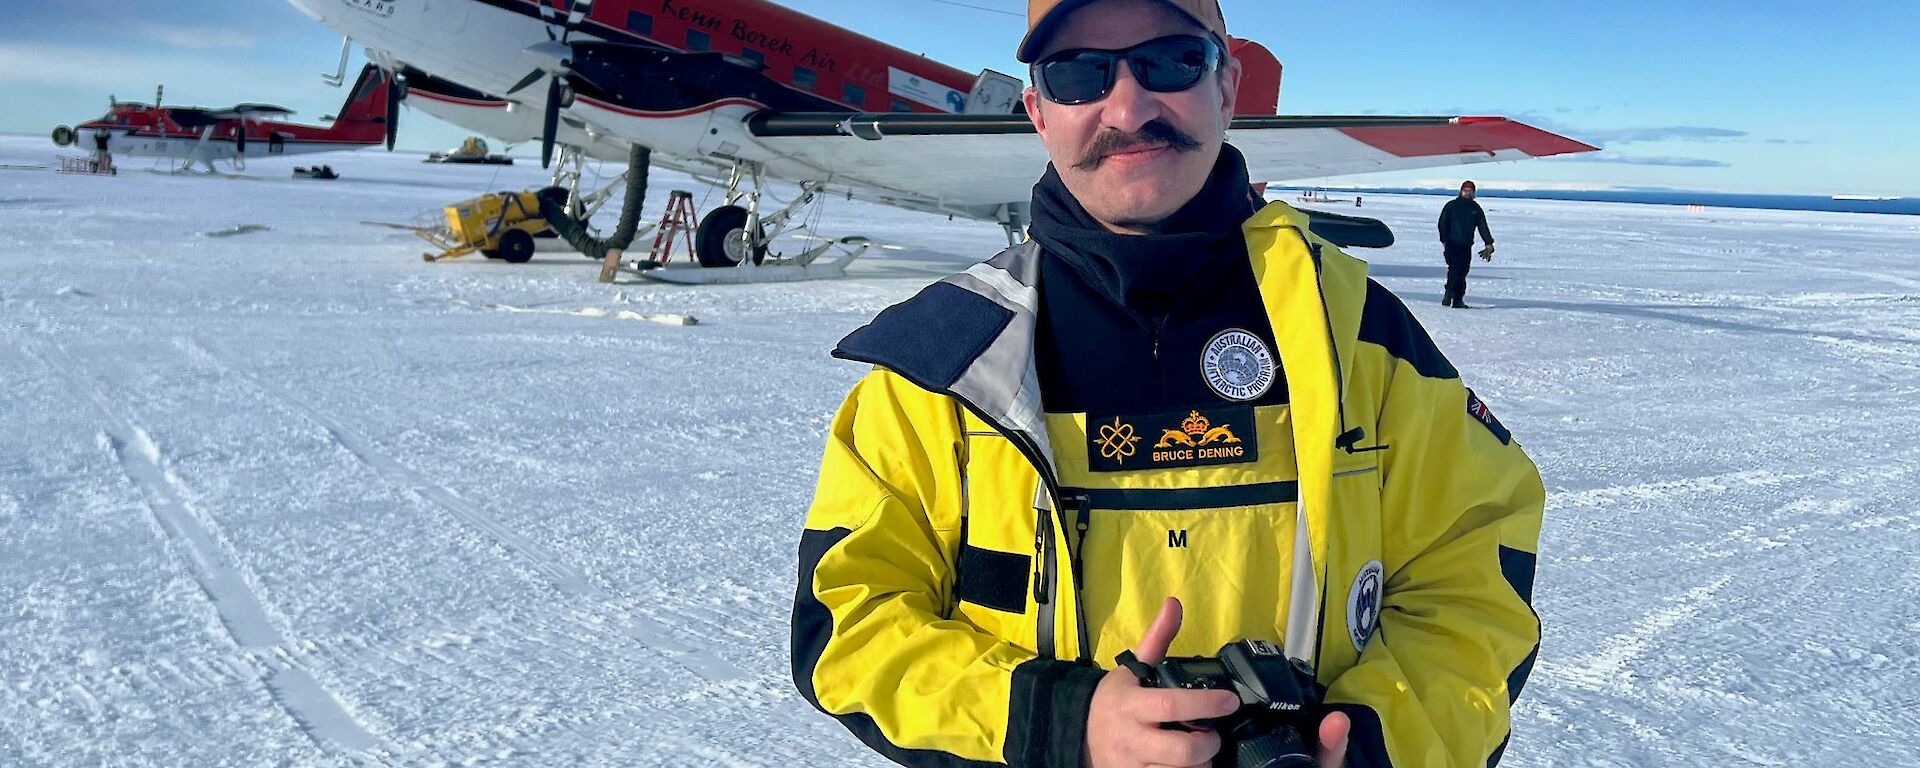 Antarctic expeditioner standing in front of DC-3 aircraft